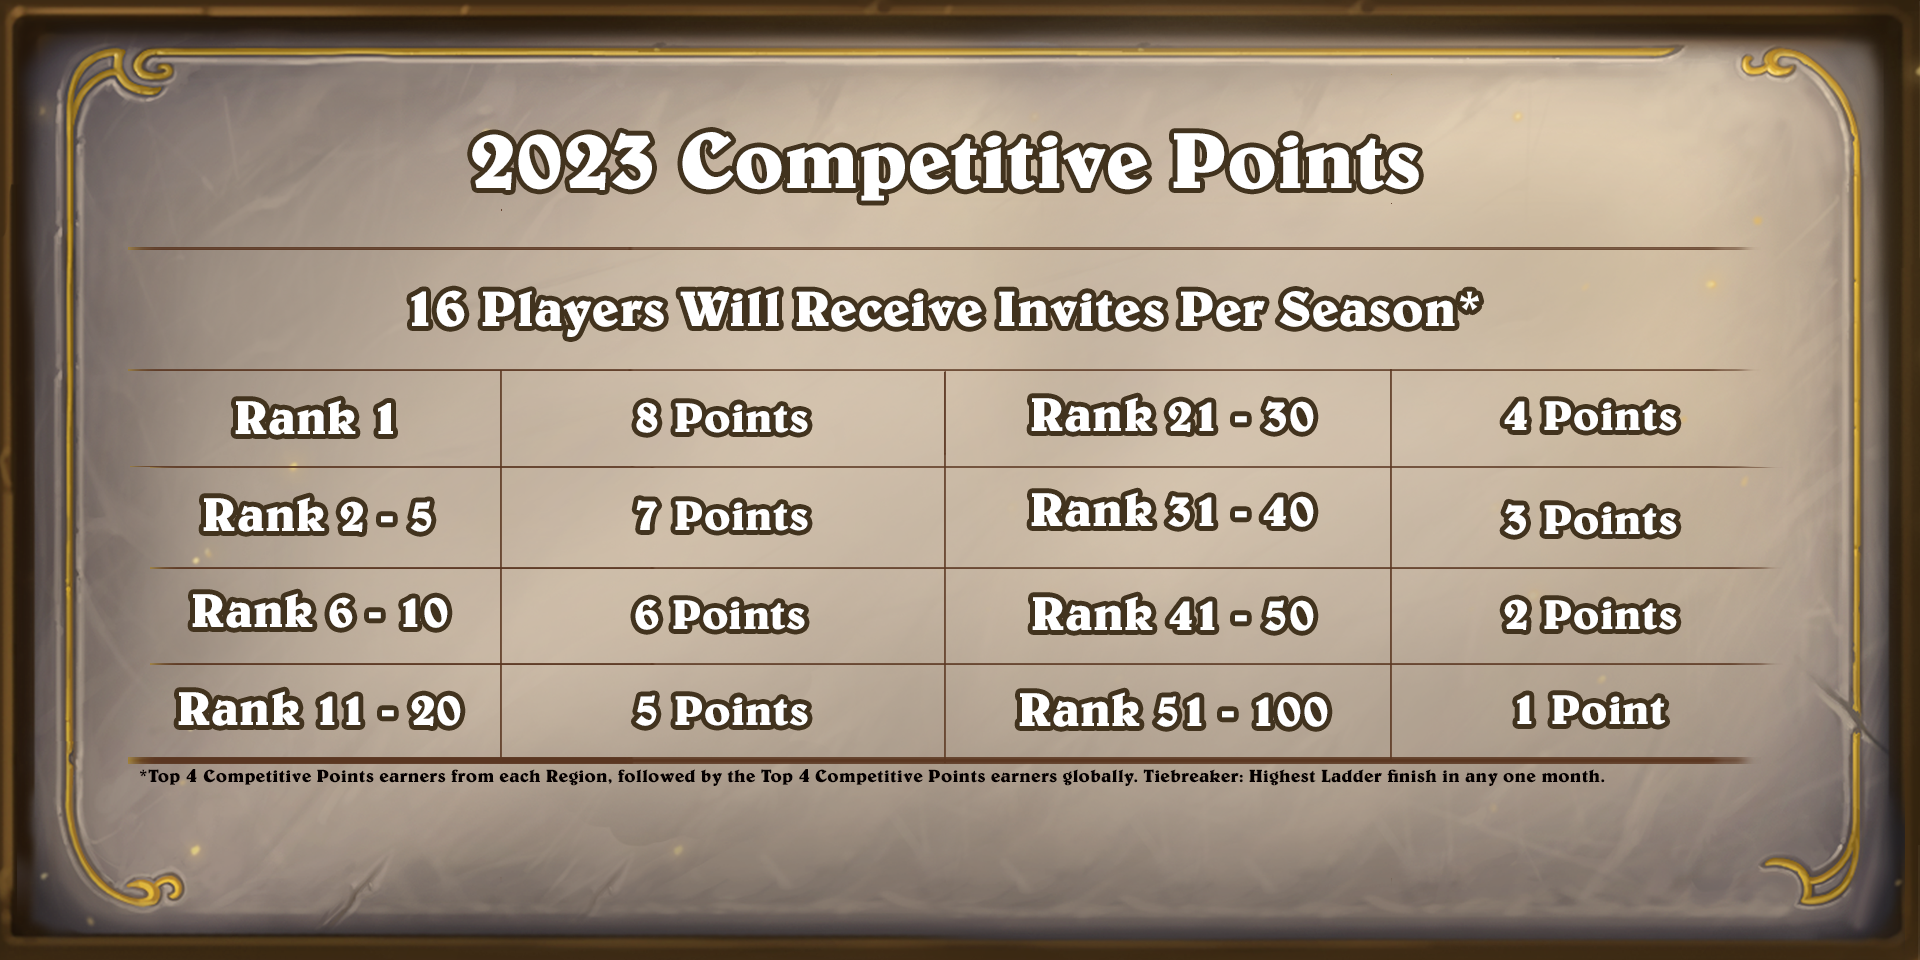 HS_CompetitivePoints_System_1920x1080_kortere versie.png